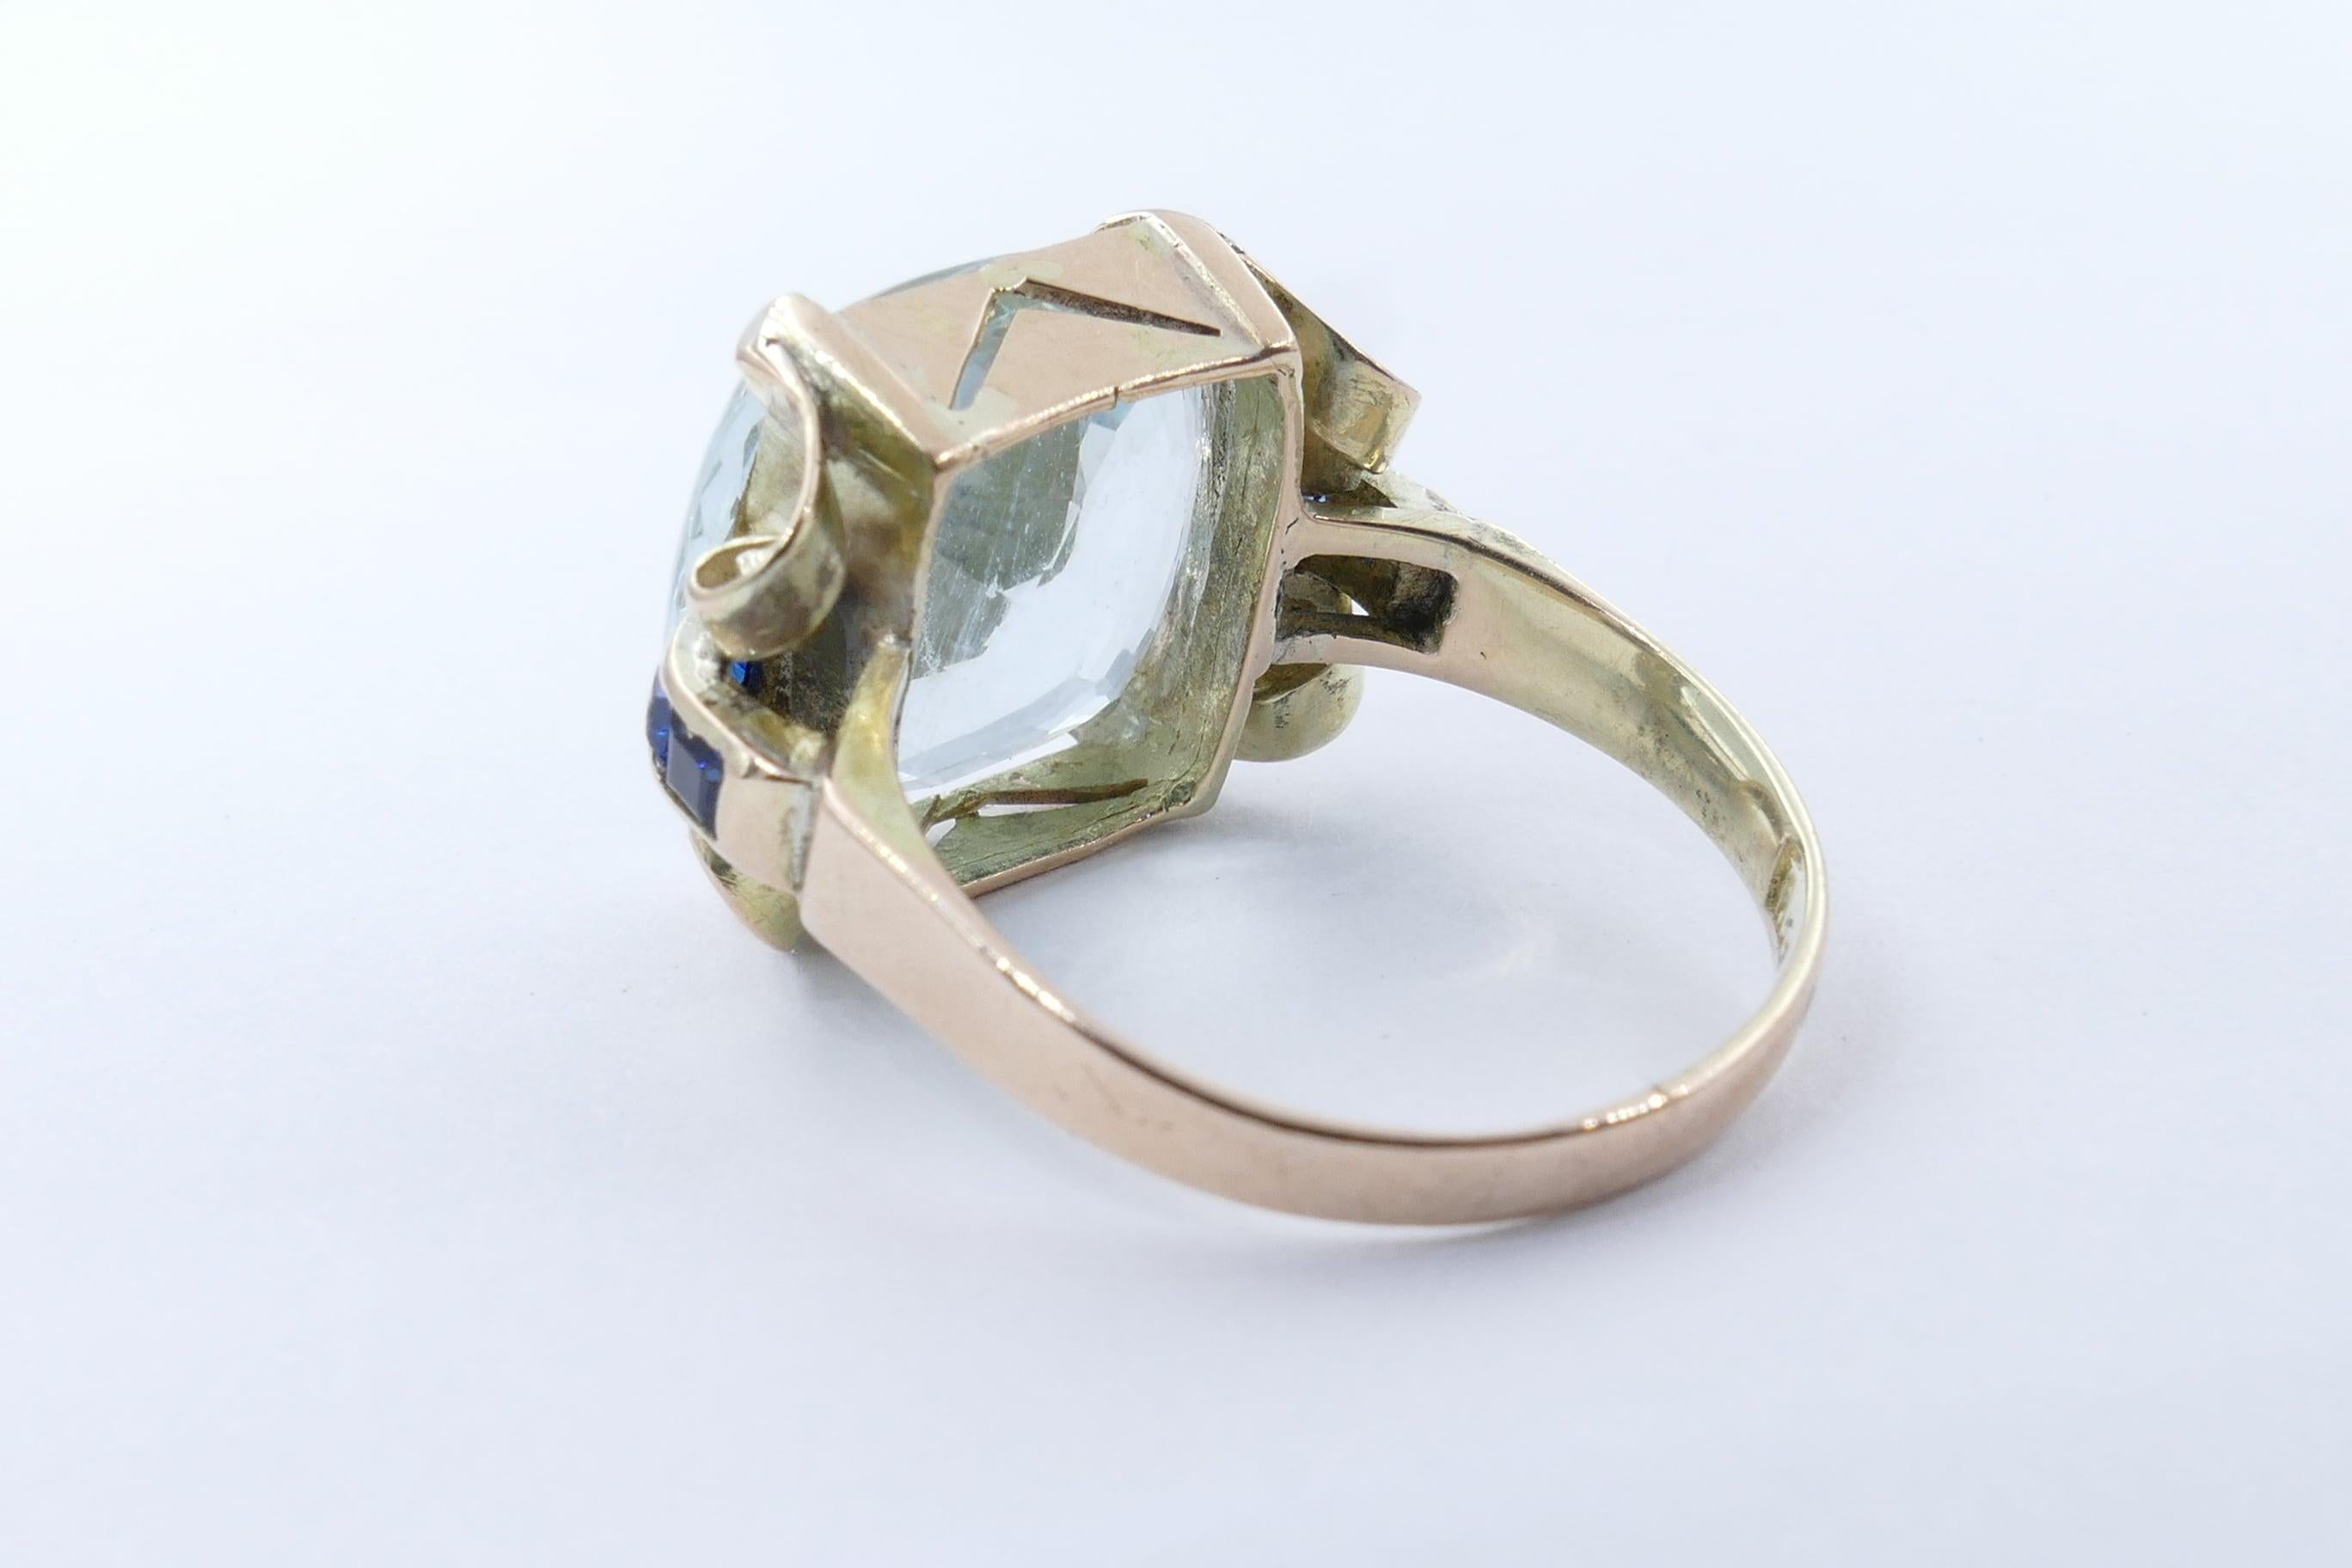 One large light greenish/blue Aquamarine 11.87 carats is the stunning centrepiece of this beautiful Ring. The stone is eye-clean, square cushion cut, 4 claw set. It is flanked by 6 bright royal blue sapphires, tone medium, clarity eye-clear &